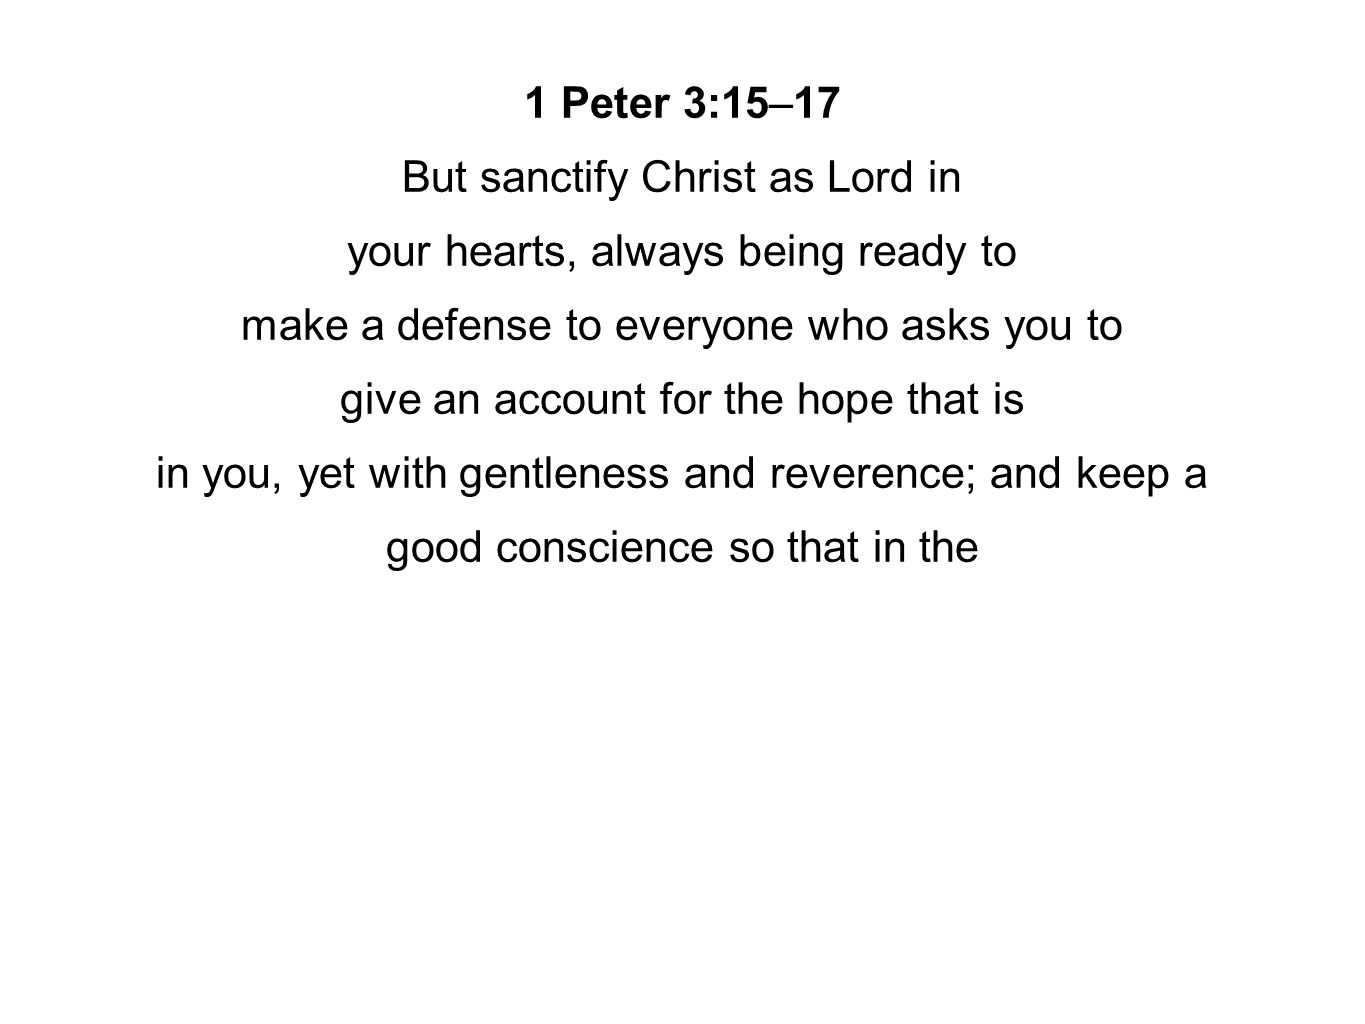 1 Peter 3:15–17 But sanctify Christ as Lord in your hearts, always being ready to make a defense to everyone who asks you to give an account for the hope that is in you, yet with gentleness and reverence; and keep a good conscience so that in the